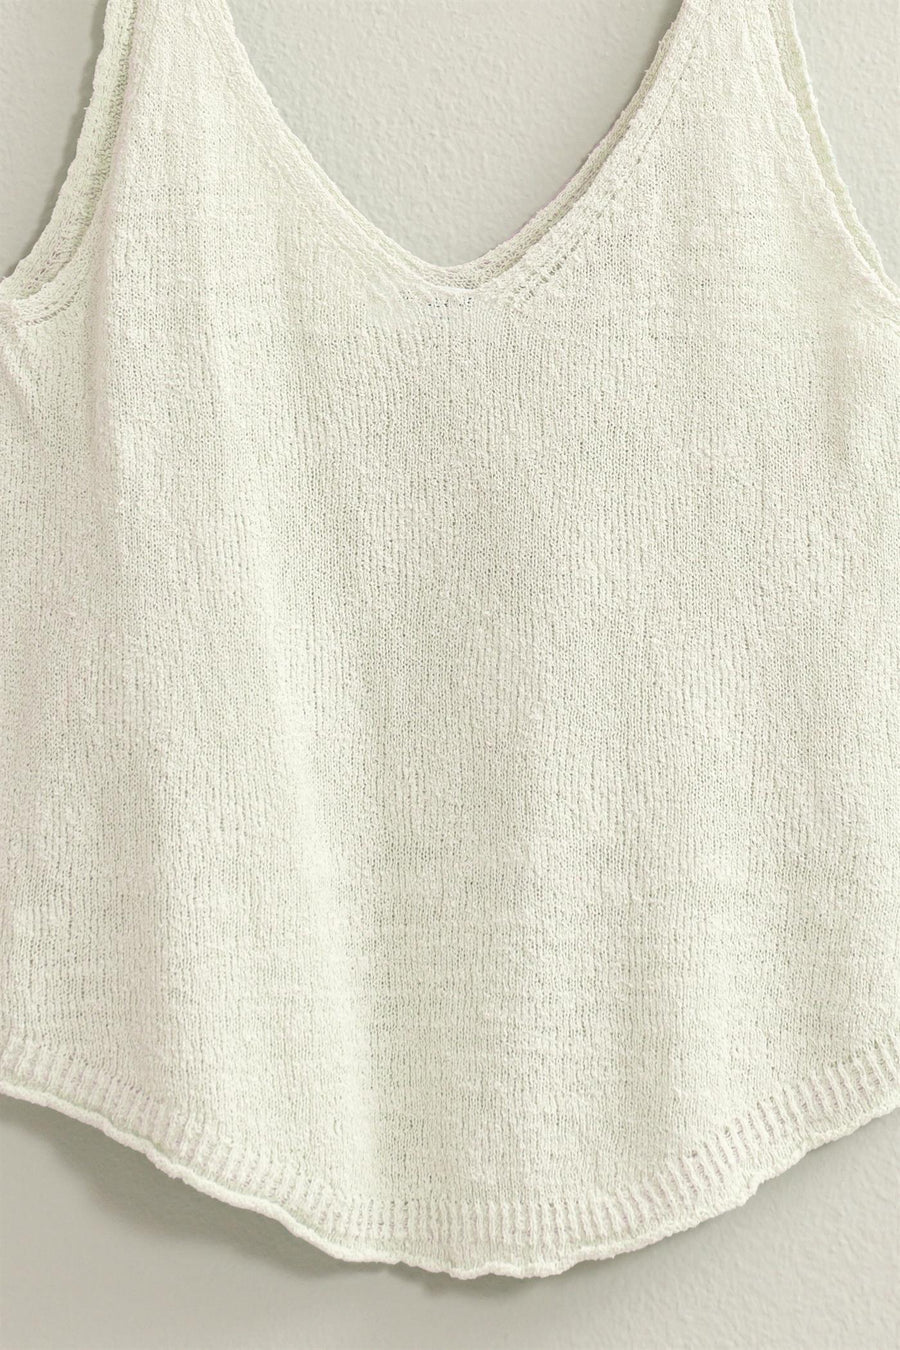 white view of Terry Sleeveless Top with a V neck and shoulder straps, featuring a relaxed fit. Made from 75% cotton and 25% polyester, ideal for pairing with shorts, pants, or skirts